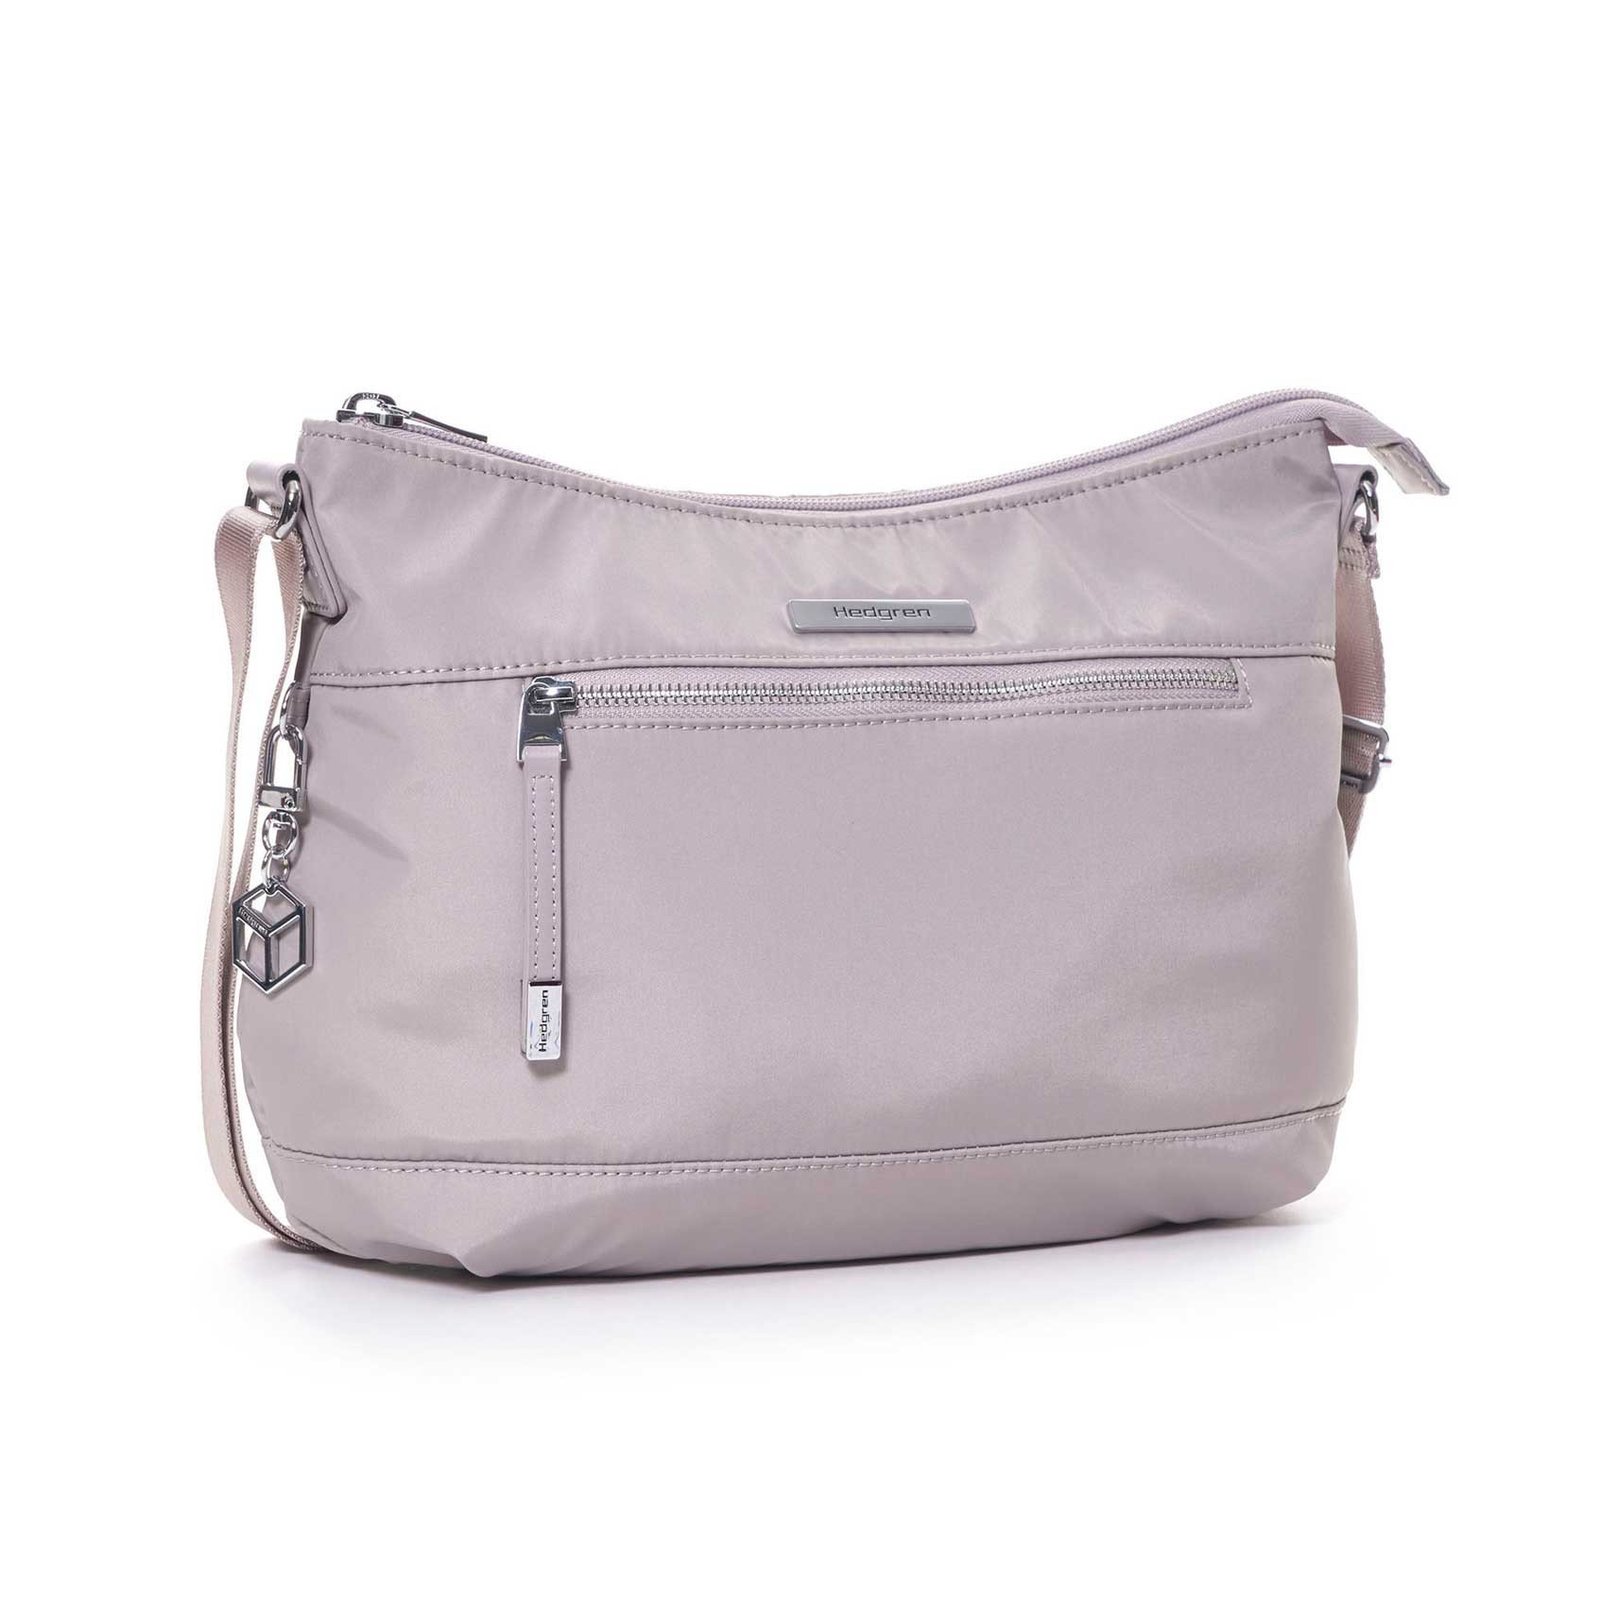 Hedgren Aura GLEAM Crossover Bag with RFID - M - Free Shipping